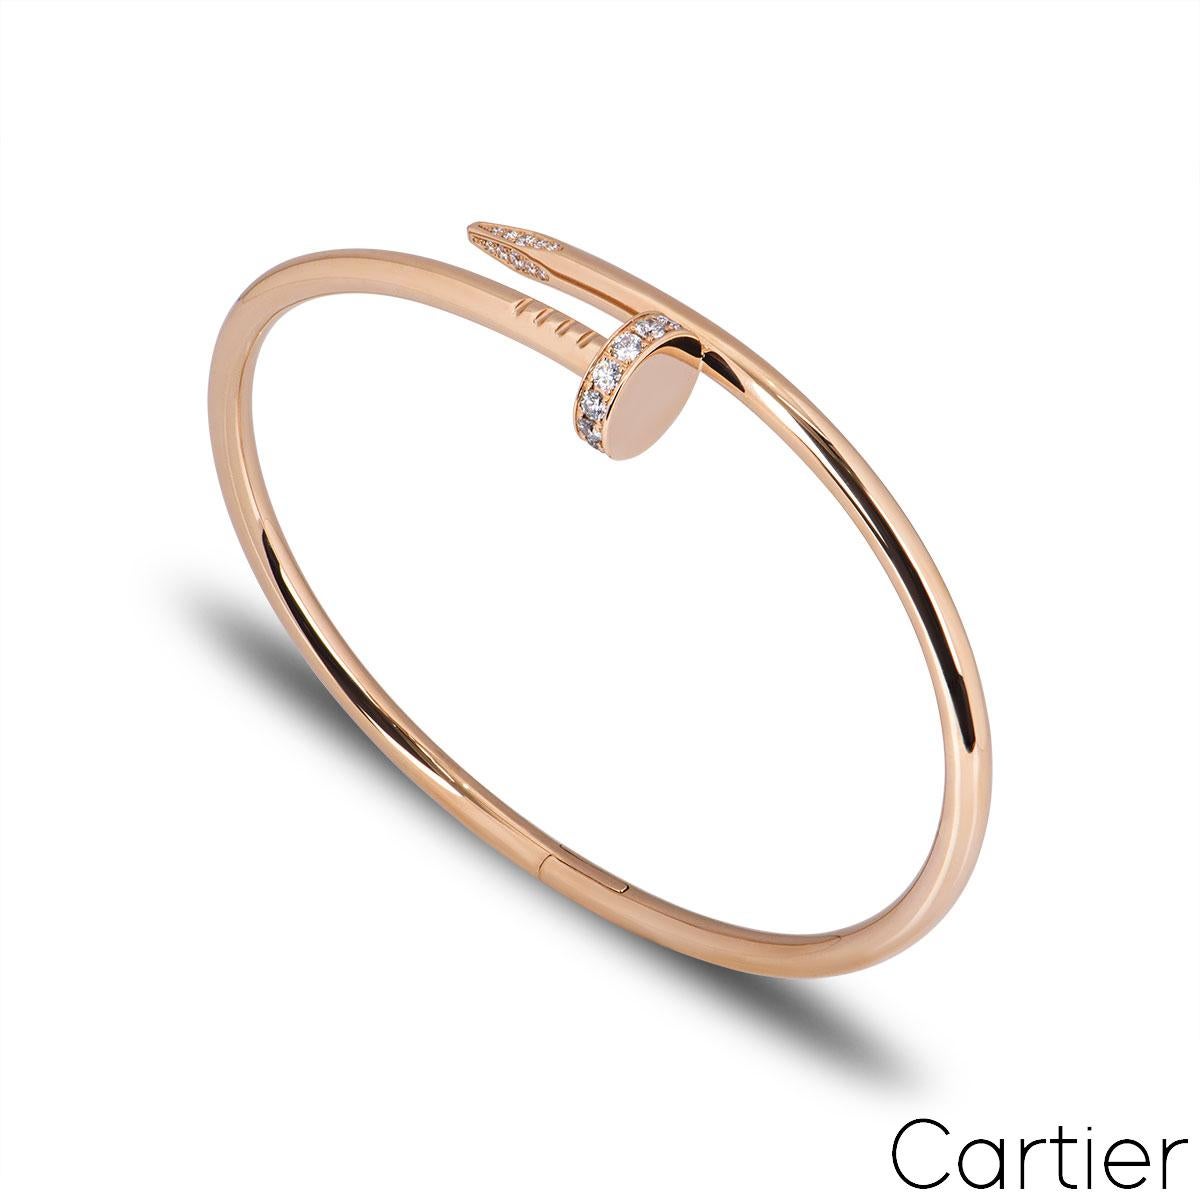 An 18k rose gold Cartier diamond bracelet from the Juste Un Clou collection. The bracelet is in the style of a nail and has 27 round brilliant cut pave diamonds set in the head and tip, totalling 0.54ct. The diamonds are predominantly F colour and